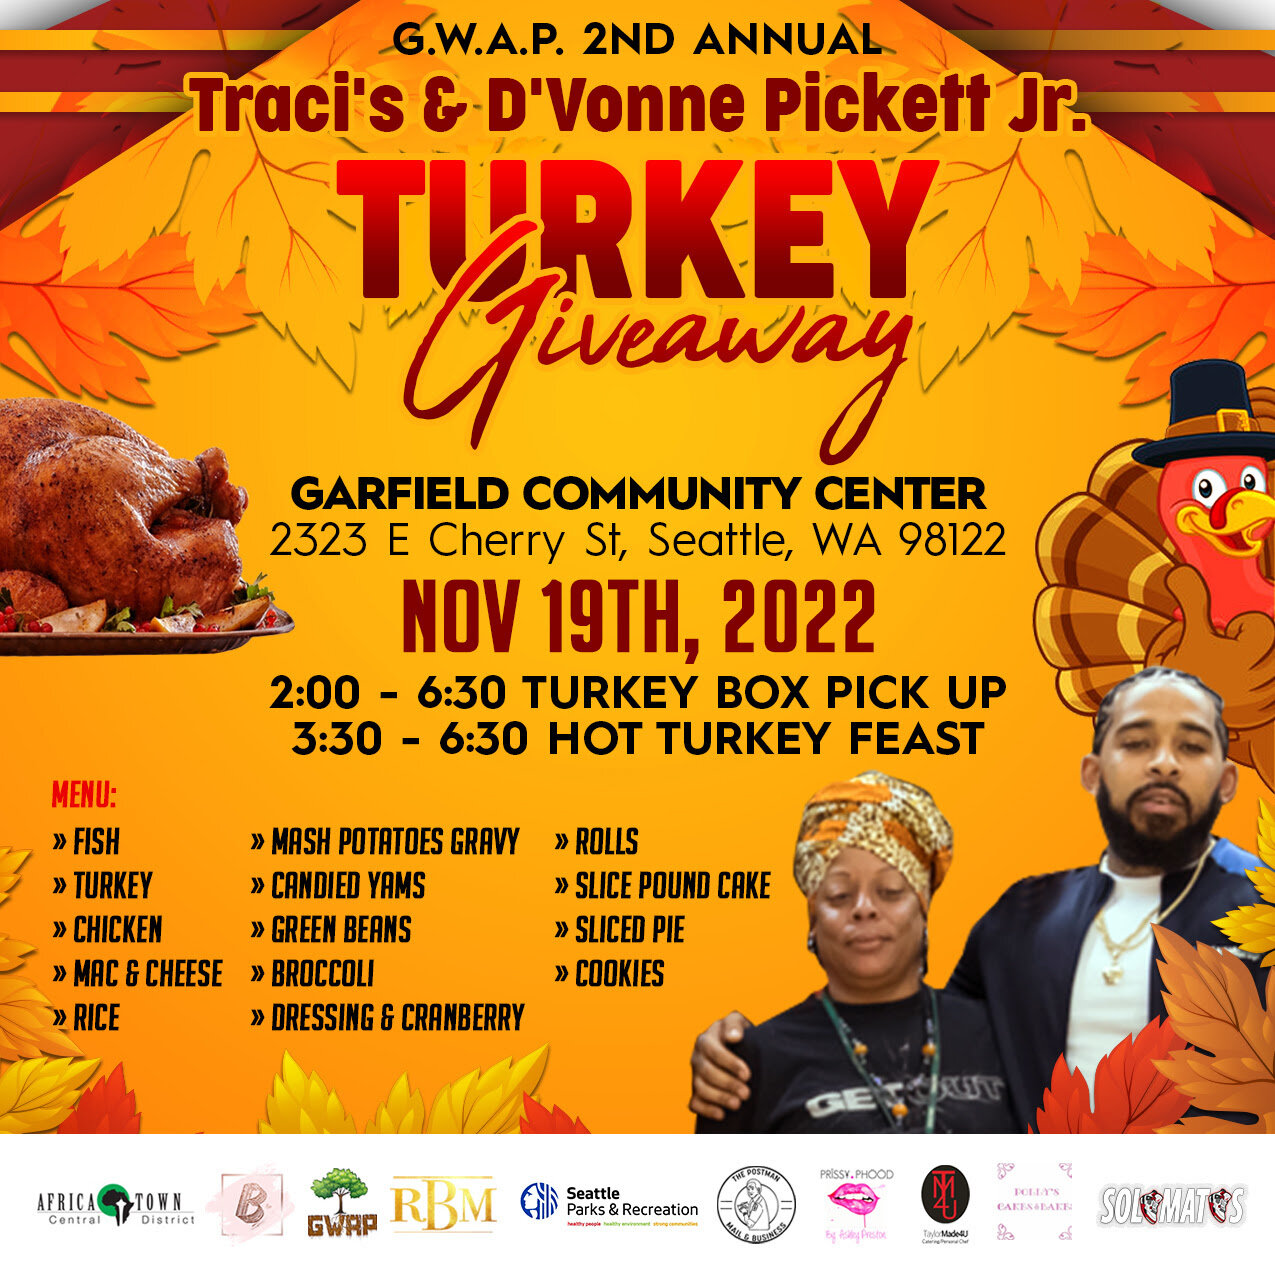 For the last two years, G.W.A.P. has hosted a Turkey Drive to help feed the community in honor of Ms. Traci - a community figure at Garfield Community Center who passed away just before the pandemic began. The drive builds on Ms. Traci&rsquo;s passio